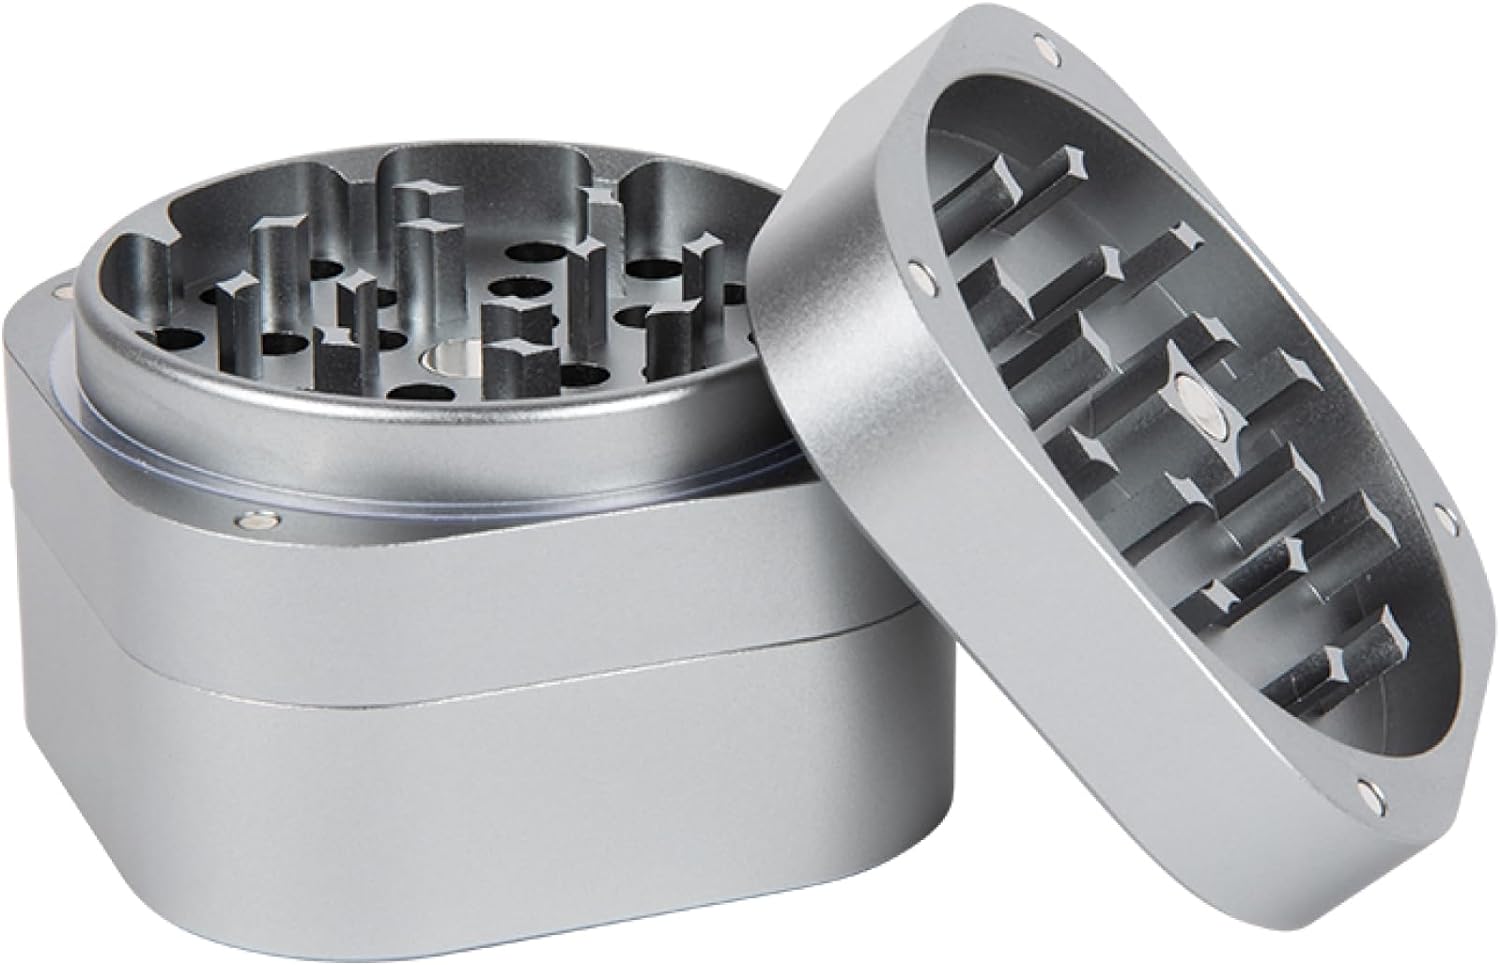 PAX Grinder  Ergonomic Herb Grinder Made from Heavy Duty Aluminum for an Even Medium Grind  Square Shape for Better Grip